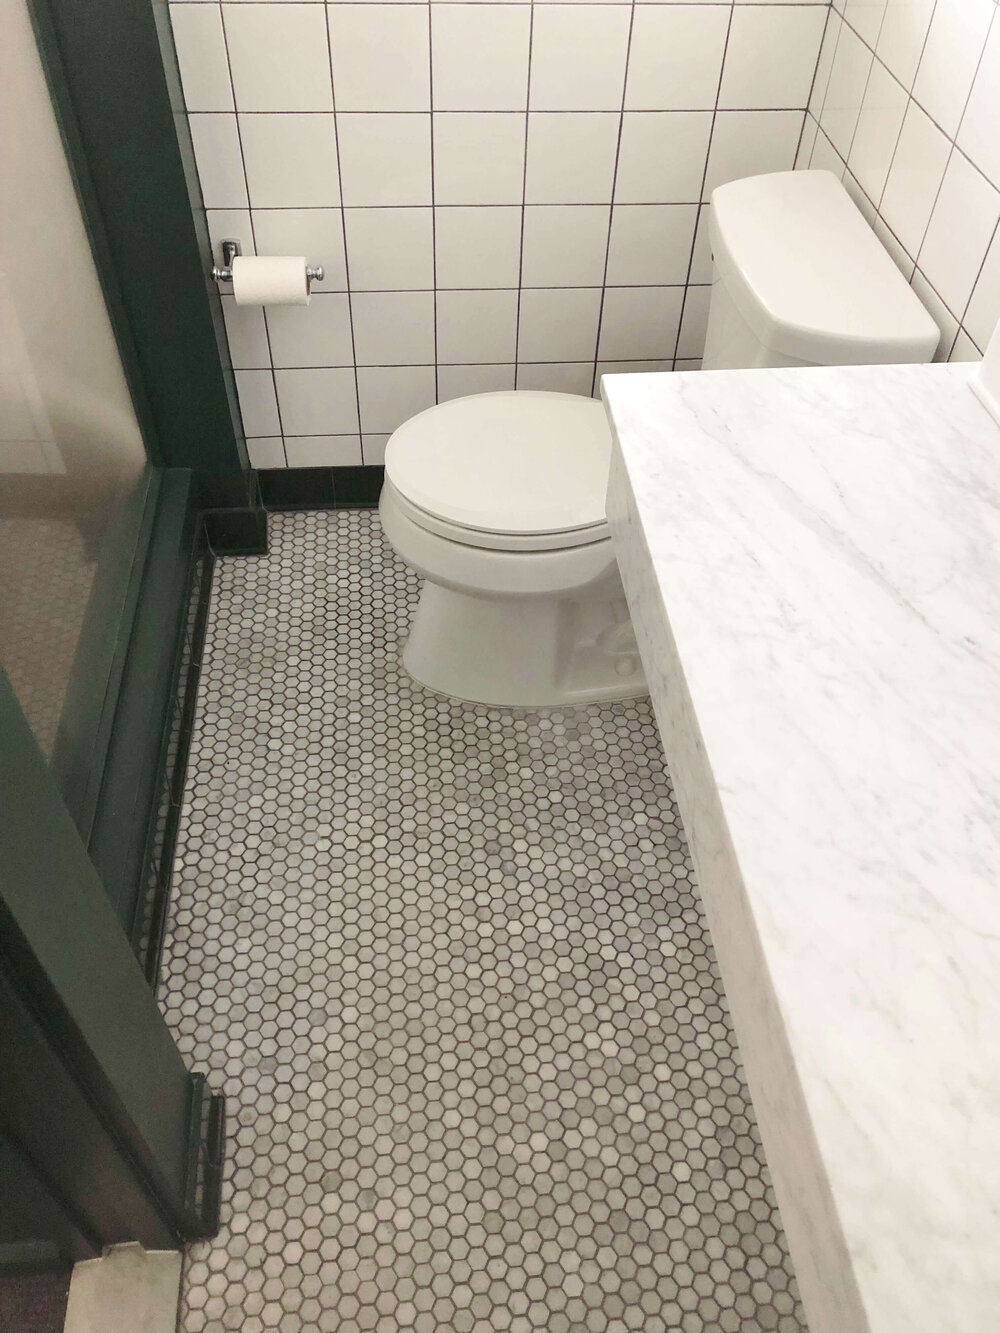 Small Bathroom Design Tips - Check out the distance between the counter and door frame and then the toilet and glass wall, in this hotel bathroom.